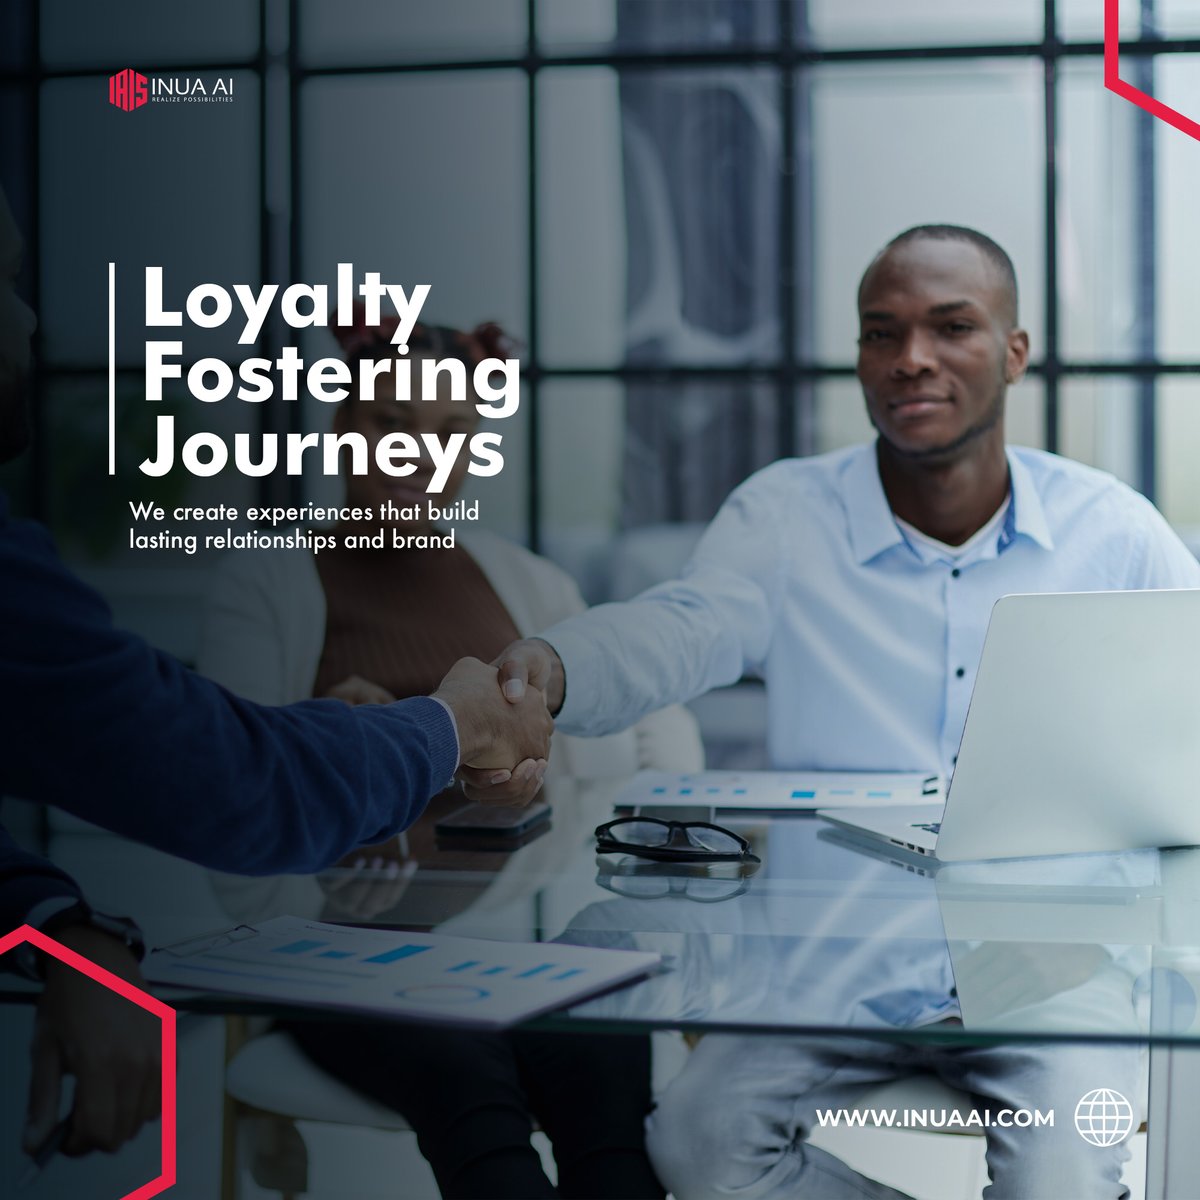 Crafting the ideal customer journey? 🧭 Our Customer Engagement Service specializes in creating seamless, memorable experiences that anticipate customer needs and deliver genuine value, building lasting loyalty. 💯

#CustomerJourney #CustomerExperience #CustomerEngagement…